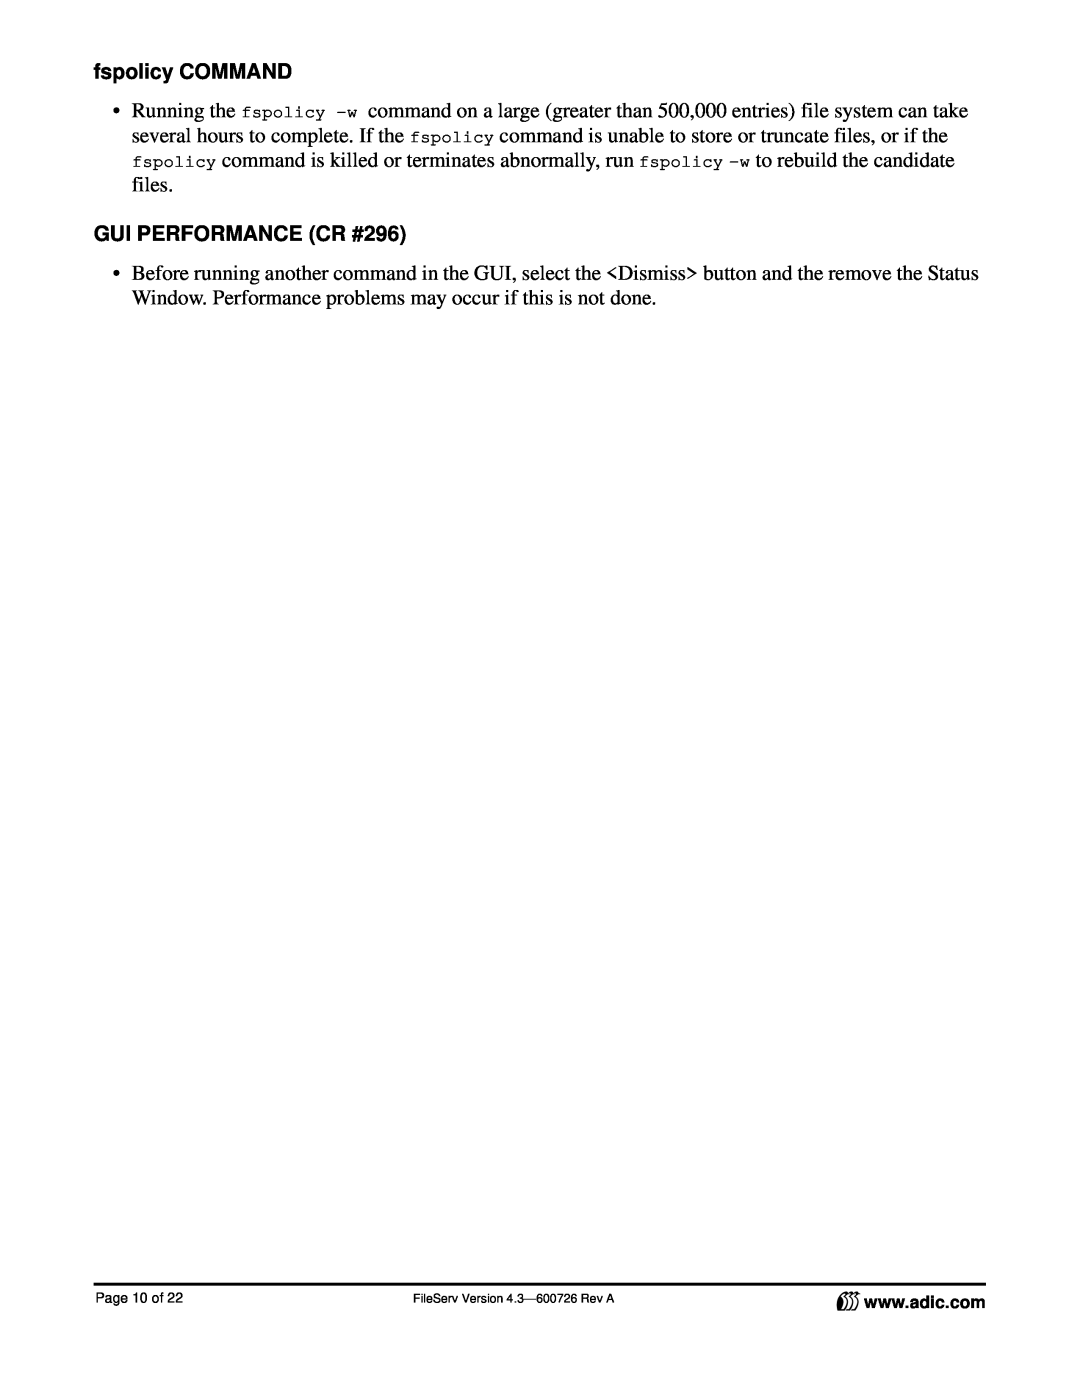 ADIC 4.3 manual fspolicy COMMAND, GUI PERFORMANCE CR #296, Page 10 of 